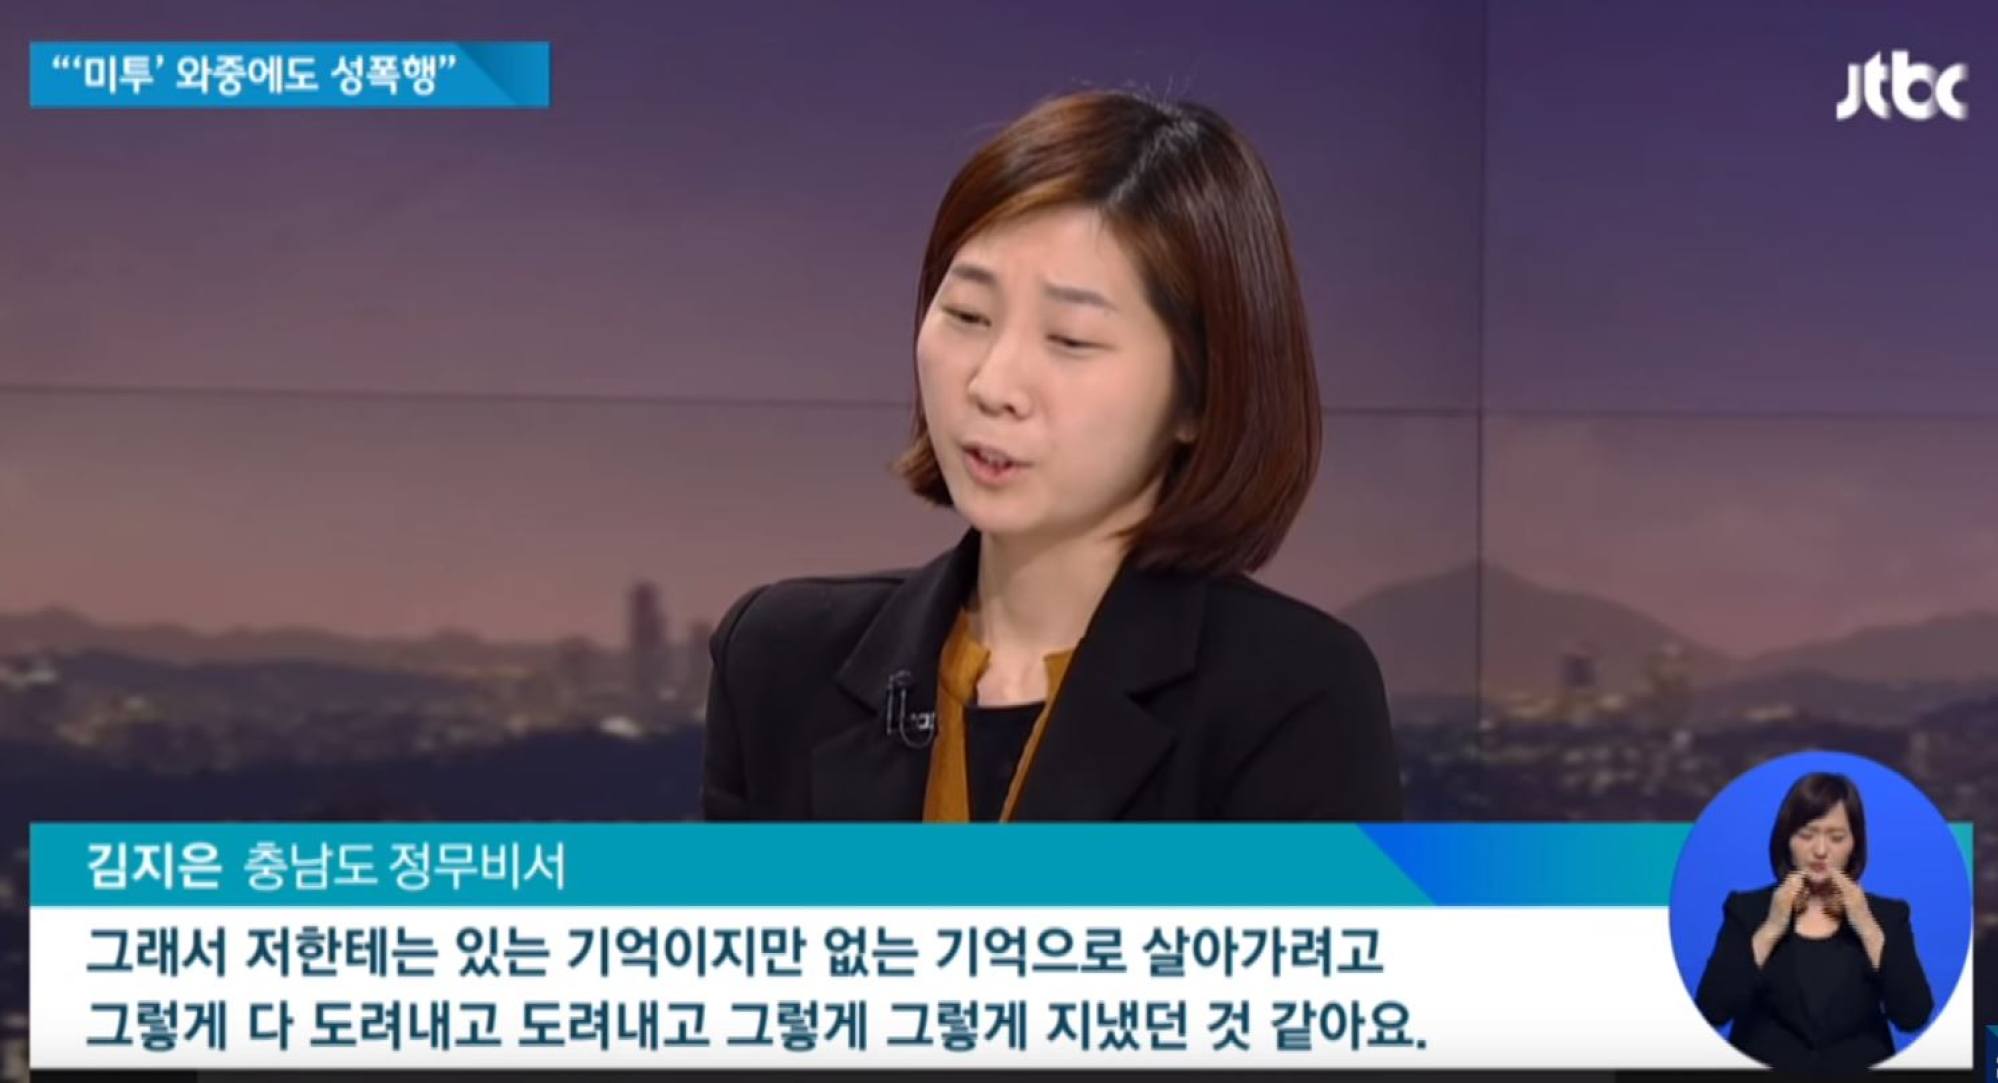 Kim Ji-eun, the woman victimised by Ahn Hee-jung, has called for a sincere apology from Kim Keon-hee.